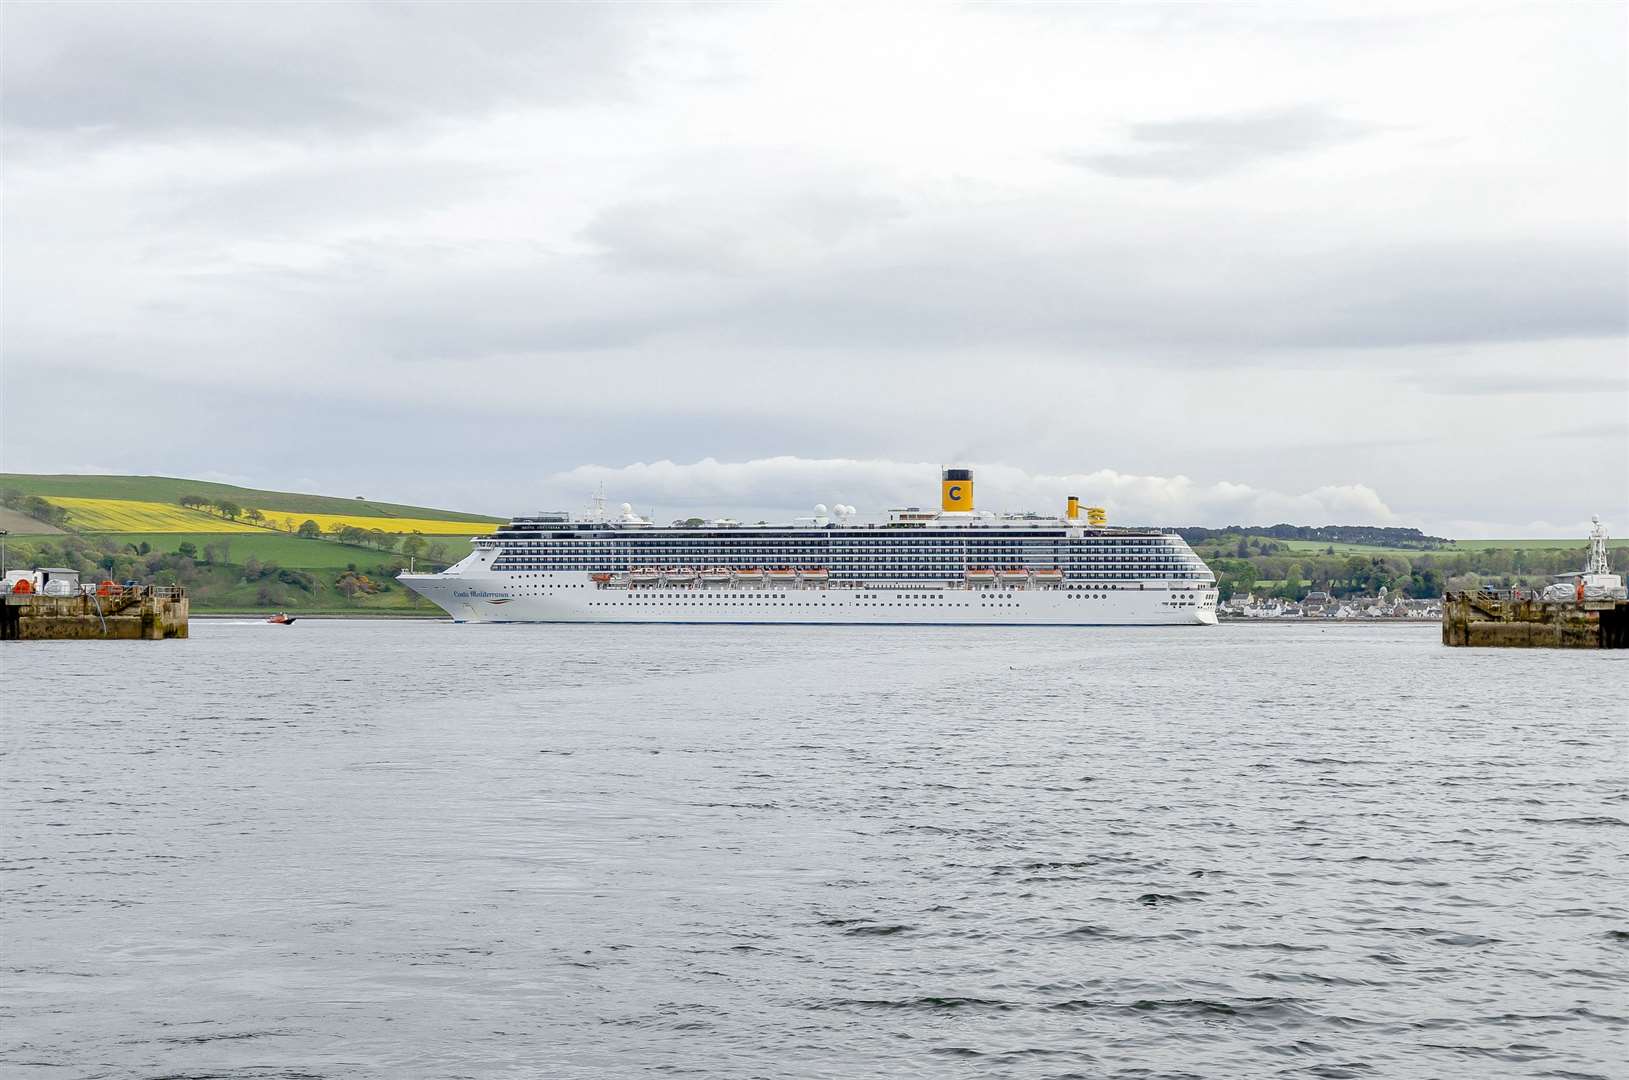 MV Costa Mediterranea visiting the Cromarty Firth in 2019. Image by: Malcolm McCurrach | © Malcolm McCurrach 2019 New Wave Images UK.